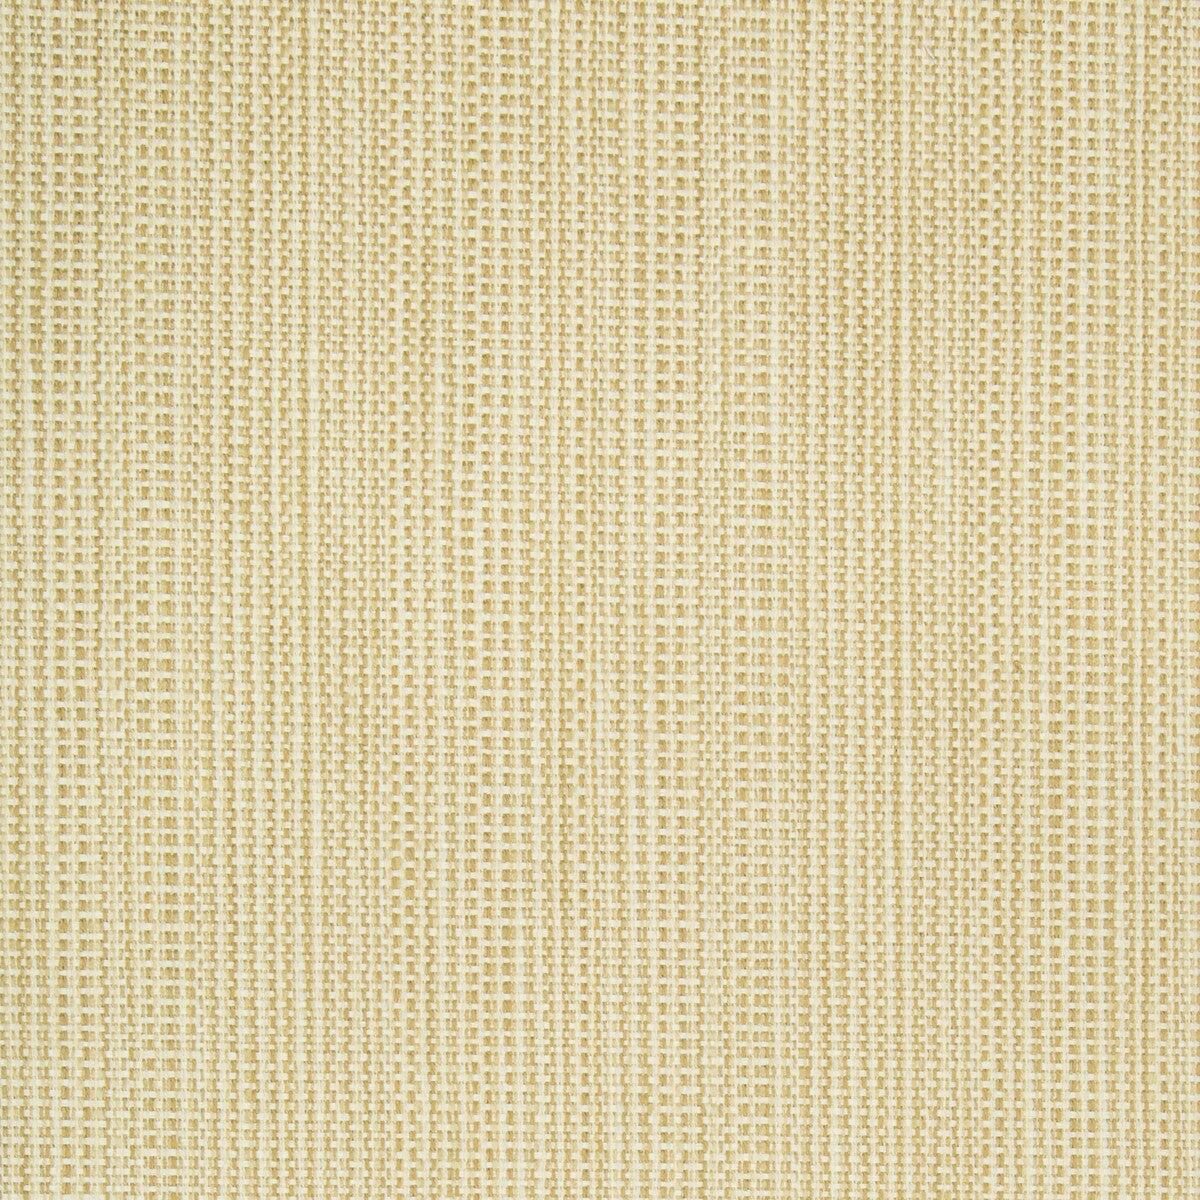 Kravet Smart fabric in 34627-16 color - pattern 34627.16.0 - by Kravet Smart in the Performance Crypton Home collection